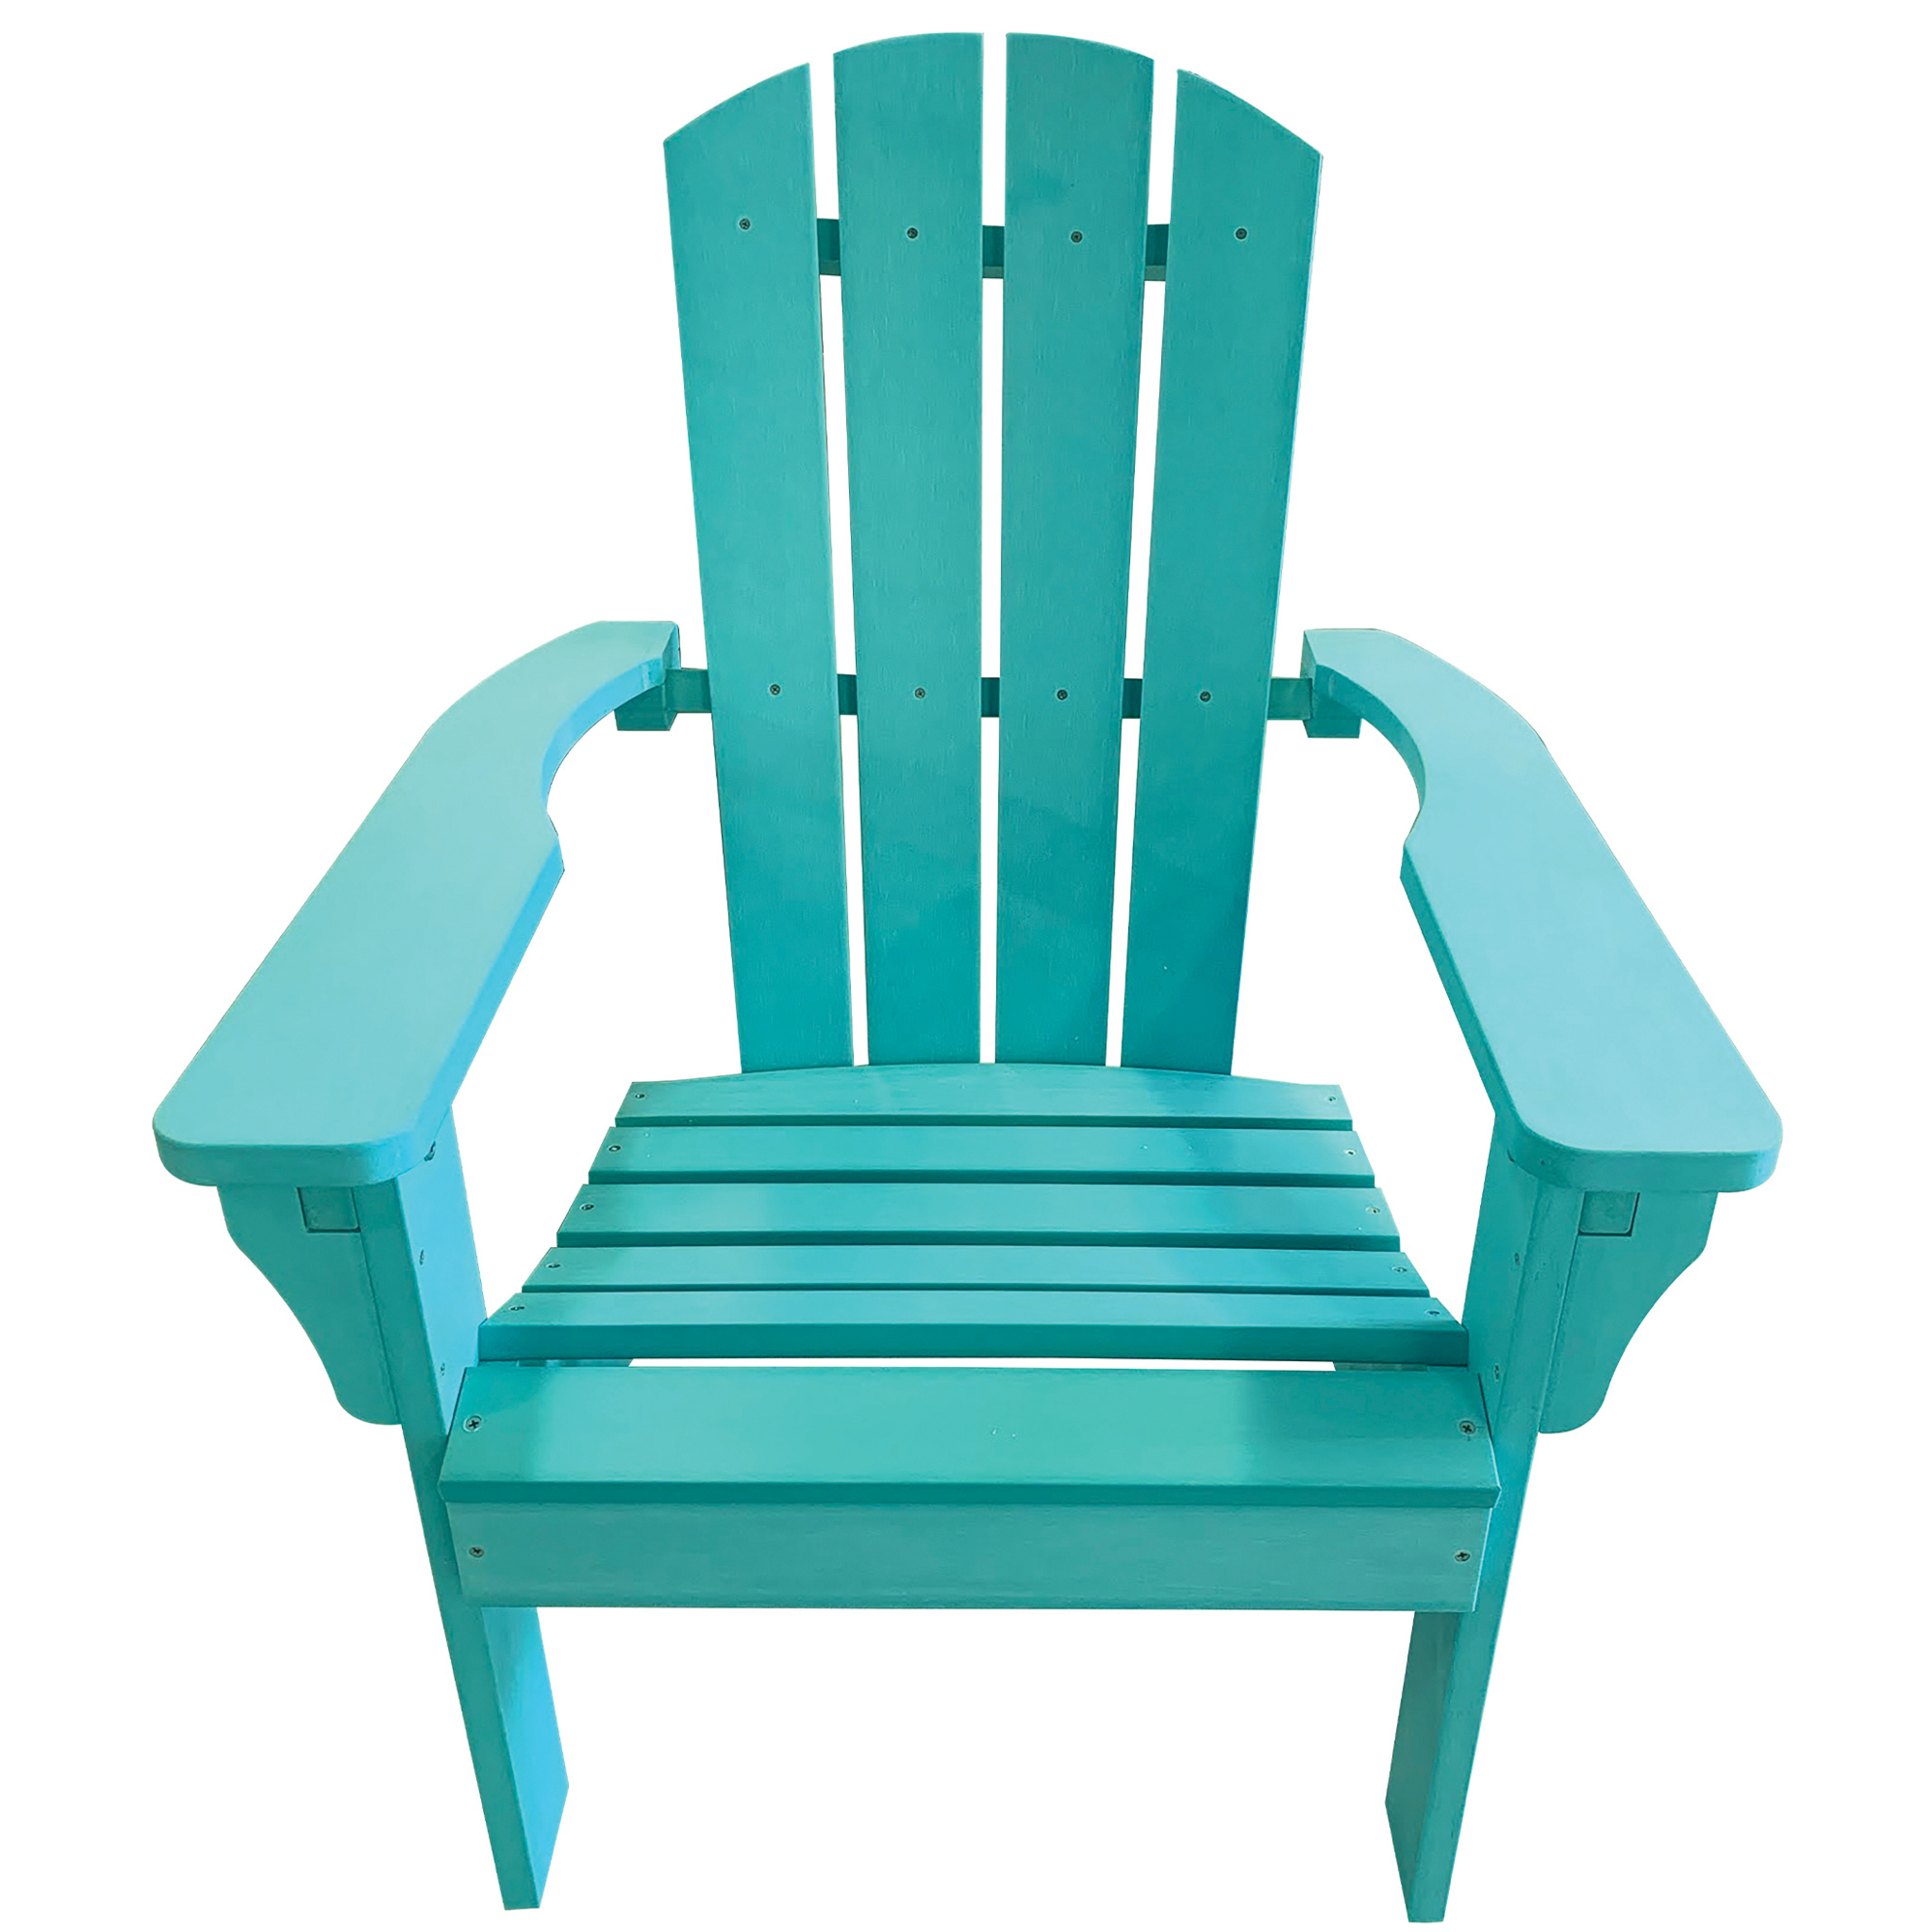 Leigh Country, Turquoise Poly Resin Adirondack Chair, Primary Color Other, Material Poly, Width 28.11 in, Model TX 94025